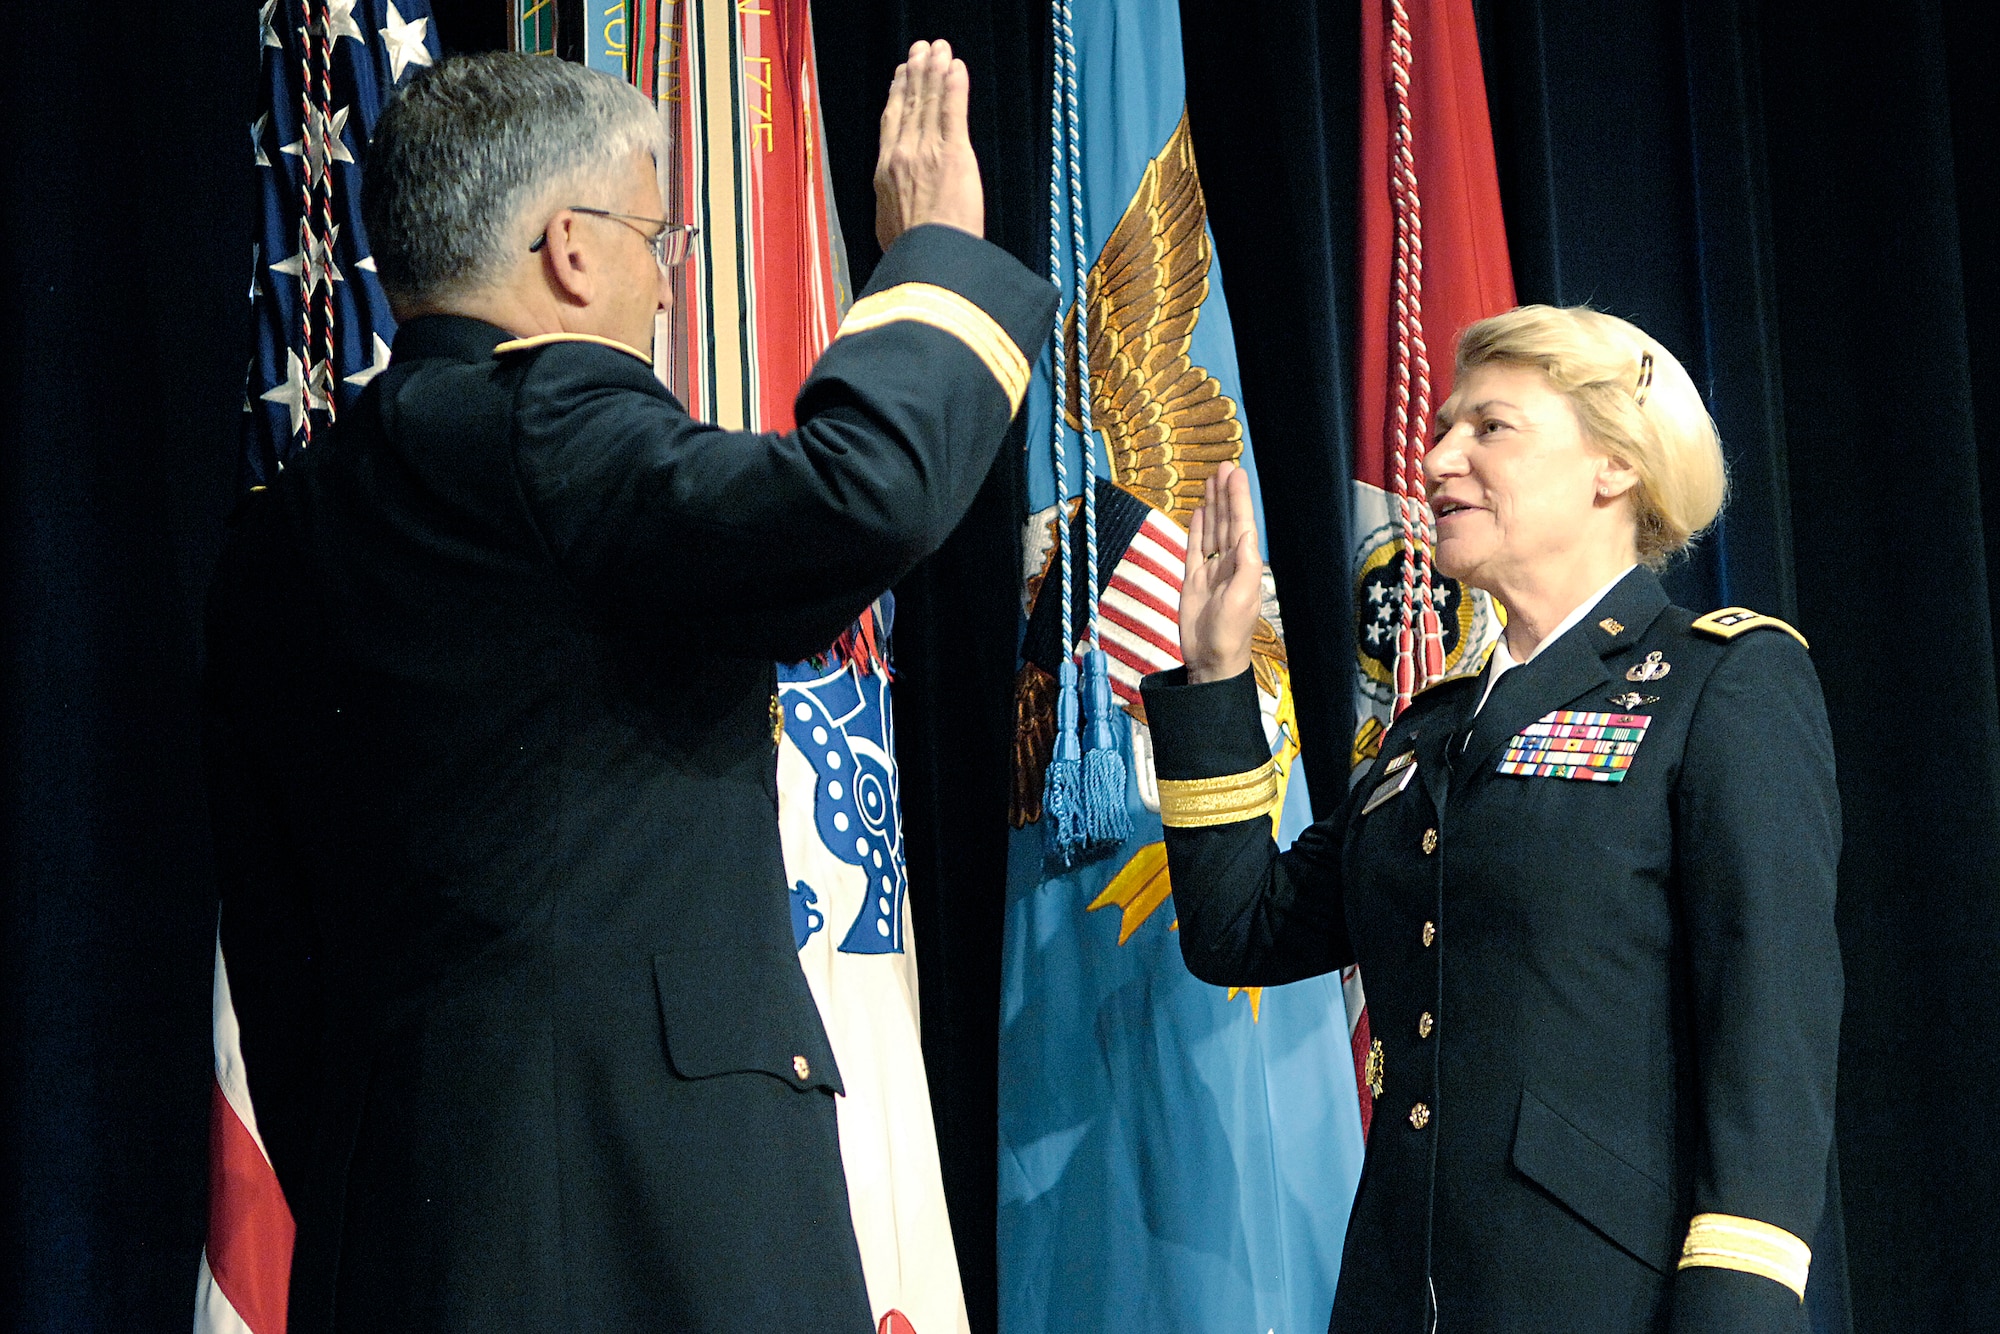 Chief of Staff of the Army Gen. George W. Casey administers the oath of office to Gen. Ann E. Dunwoody in during her promotion ceremony Nov. 14 at the Pentagon. General Dunwoody made history as the nation's first four-star female officer.  (Defense Department photo/Petty Officer 2nd Class Molly A. Burgess)